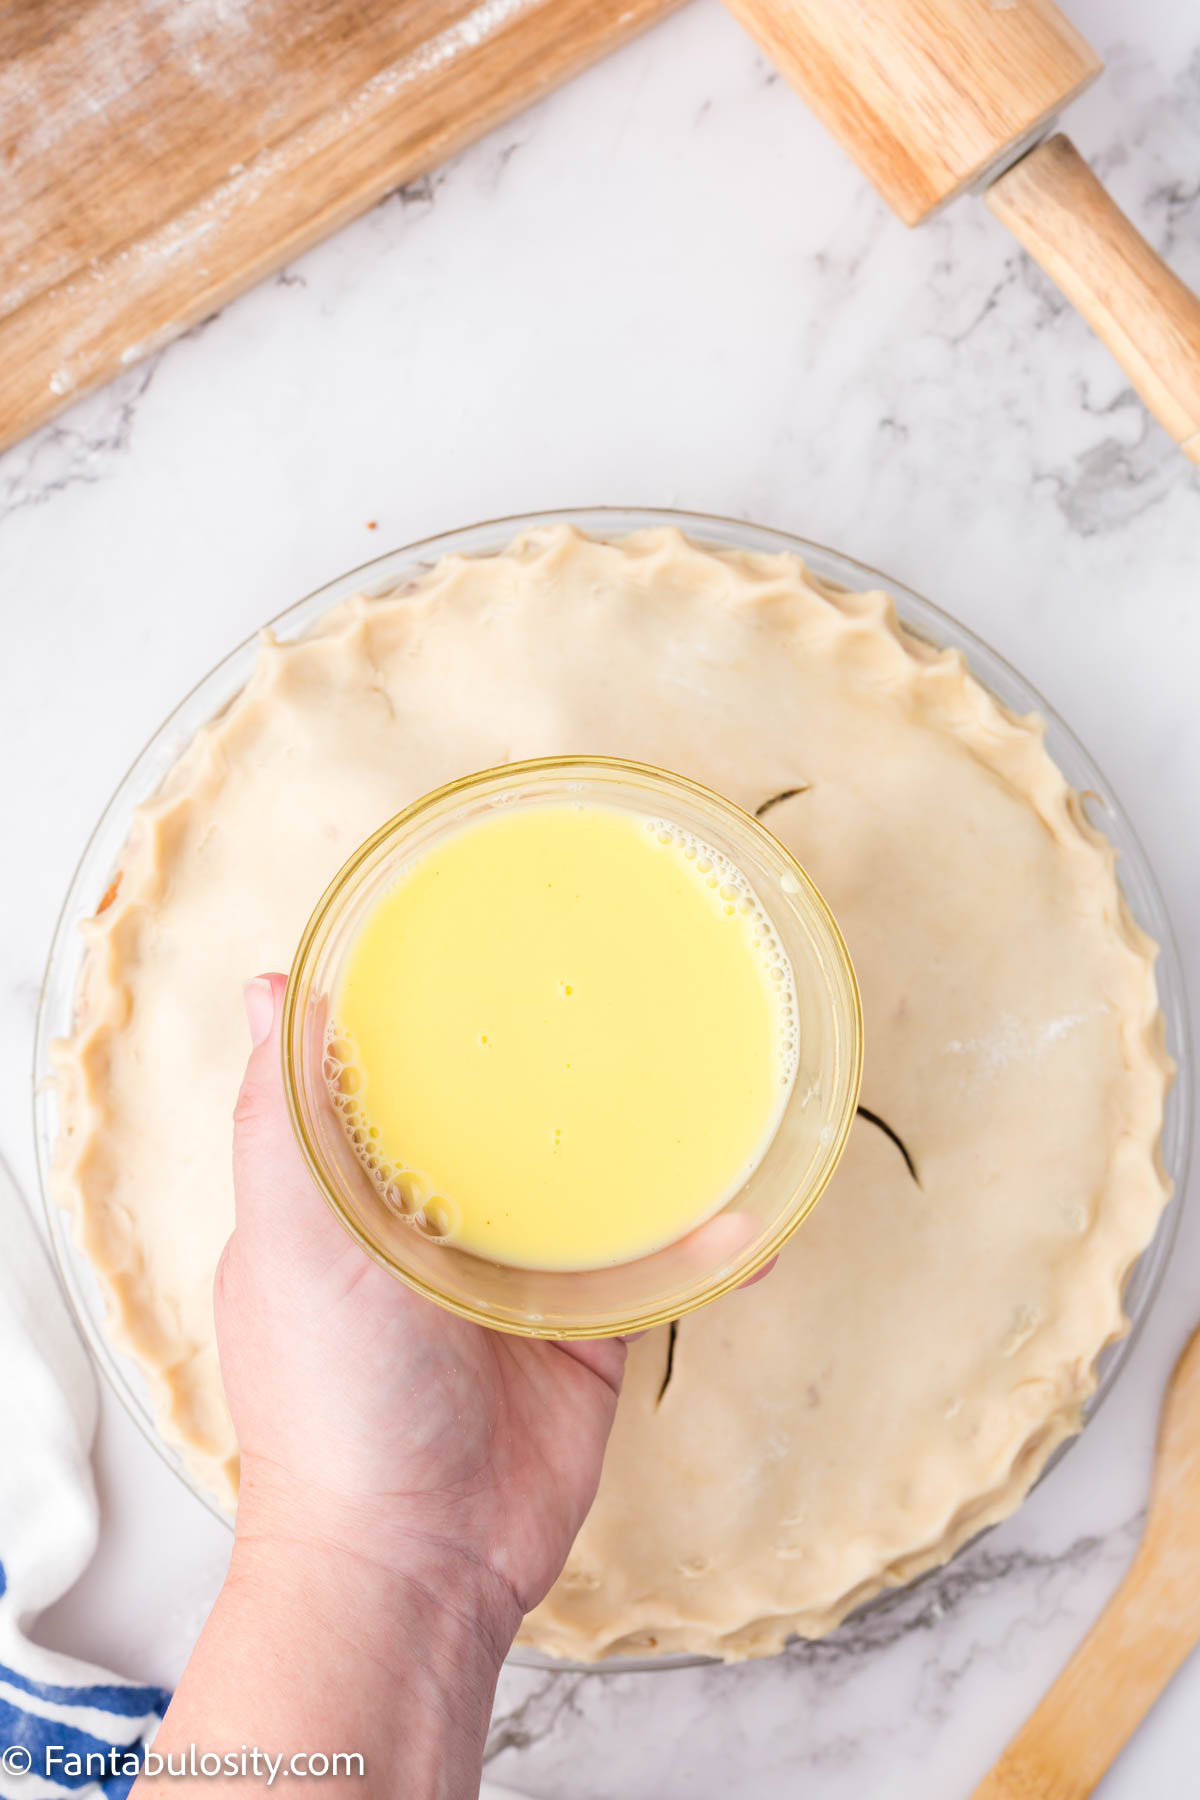 A small bowl of butter or egg white being held over an unbaked pie.